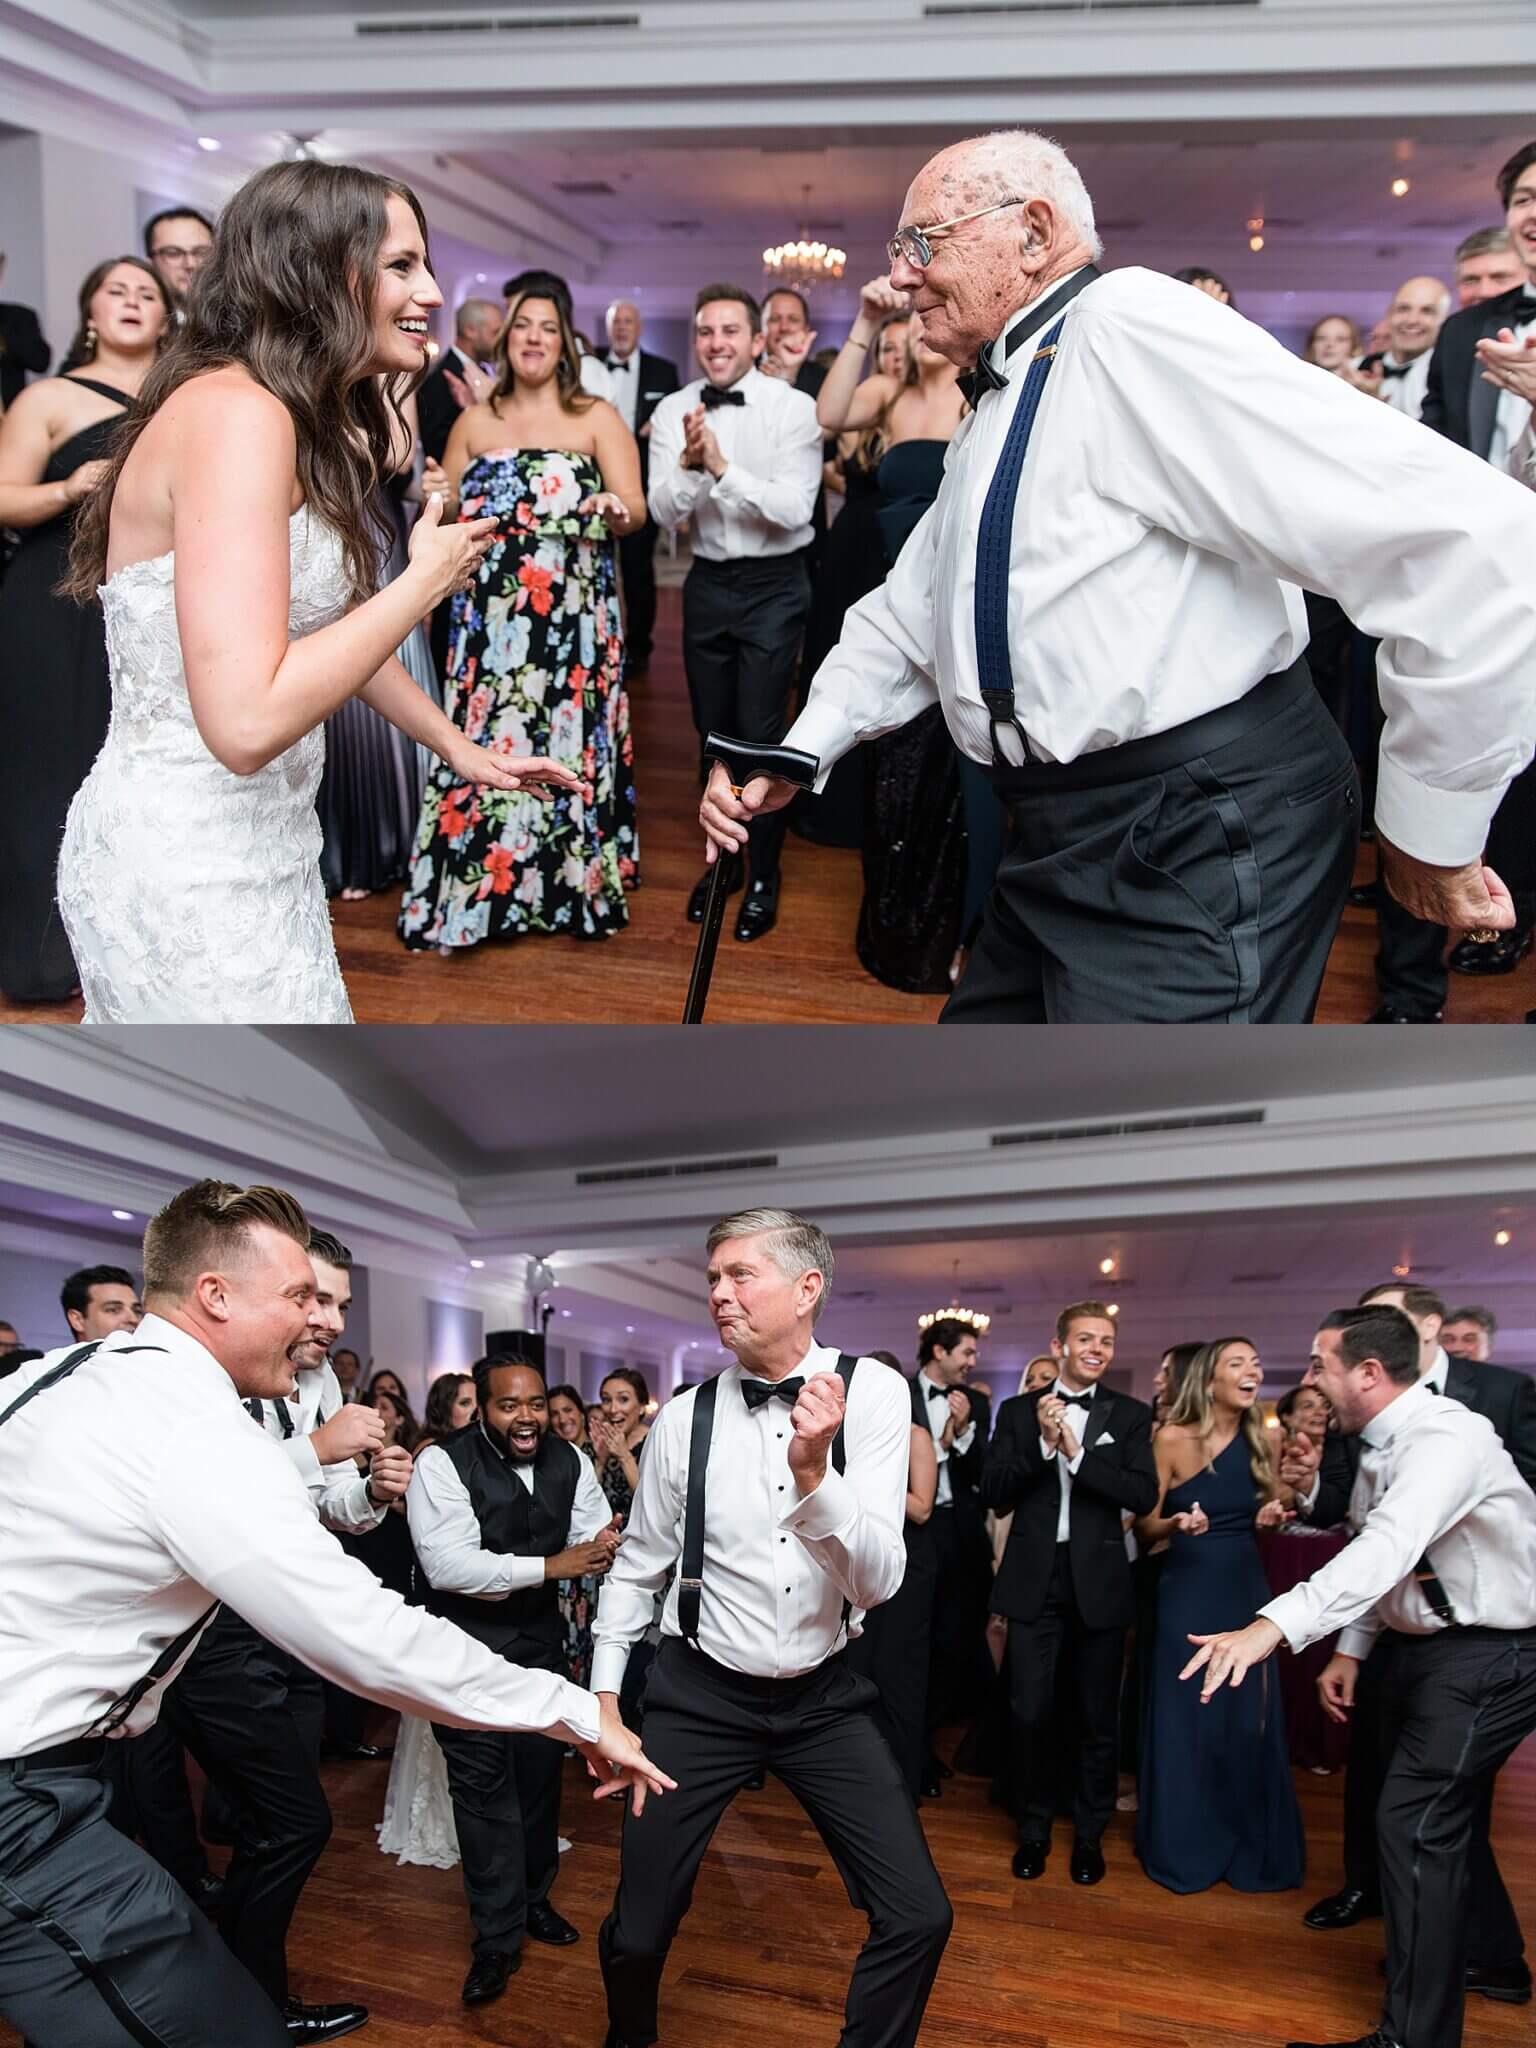 A bride and groom gracefully dancing on the dance floor at a charming New Jersey wedding venue.